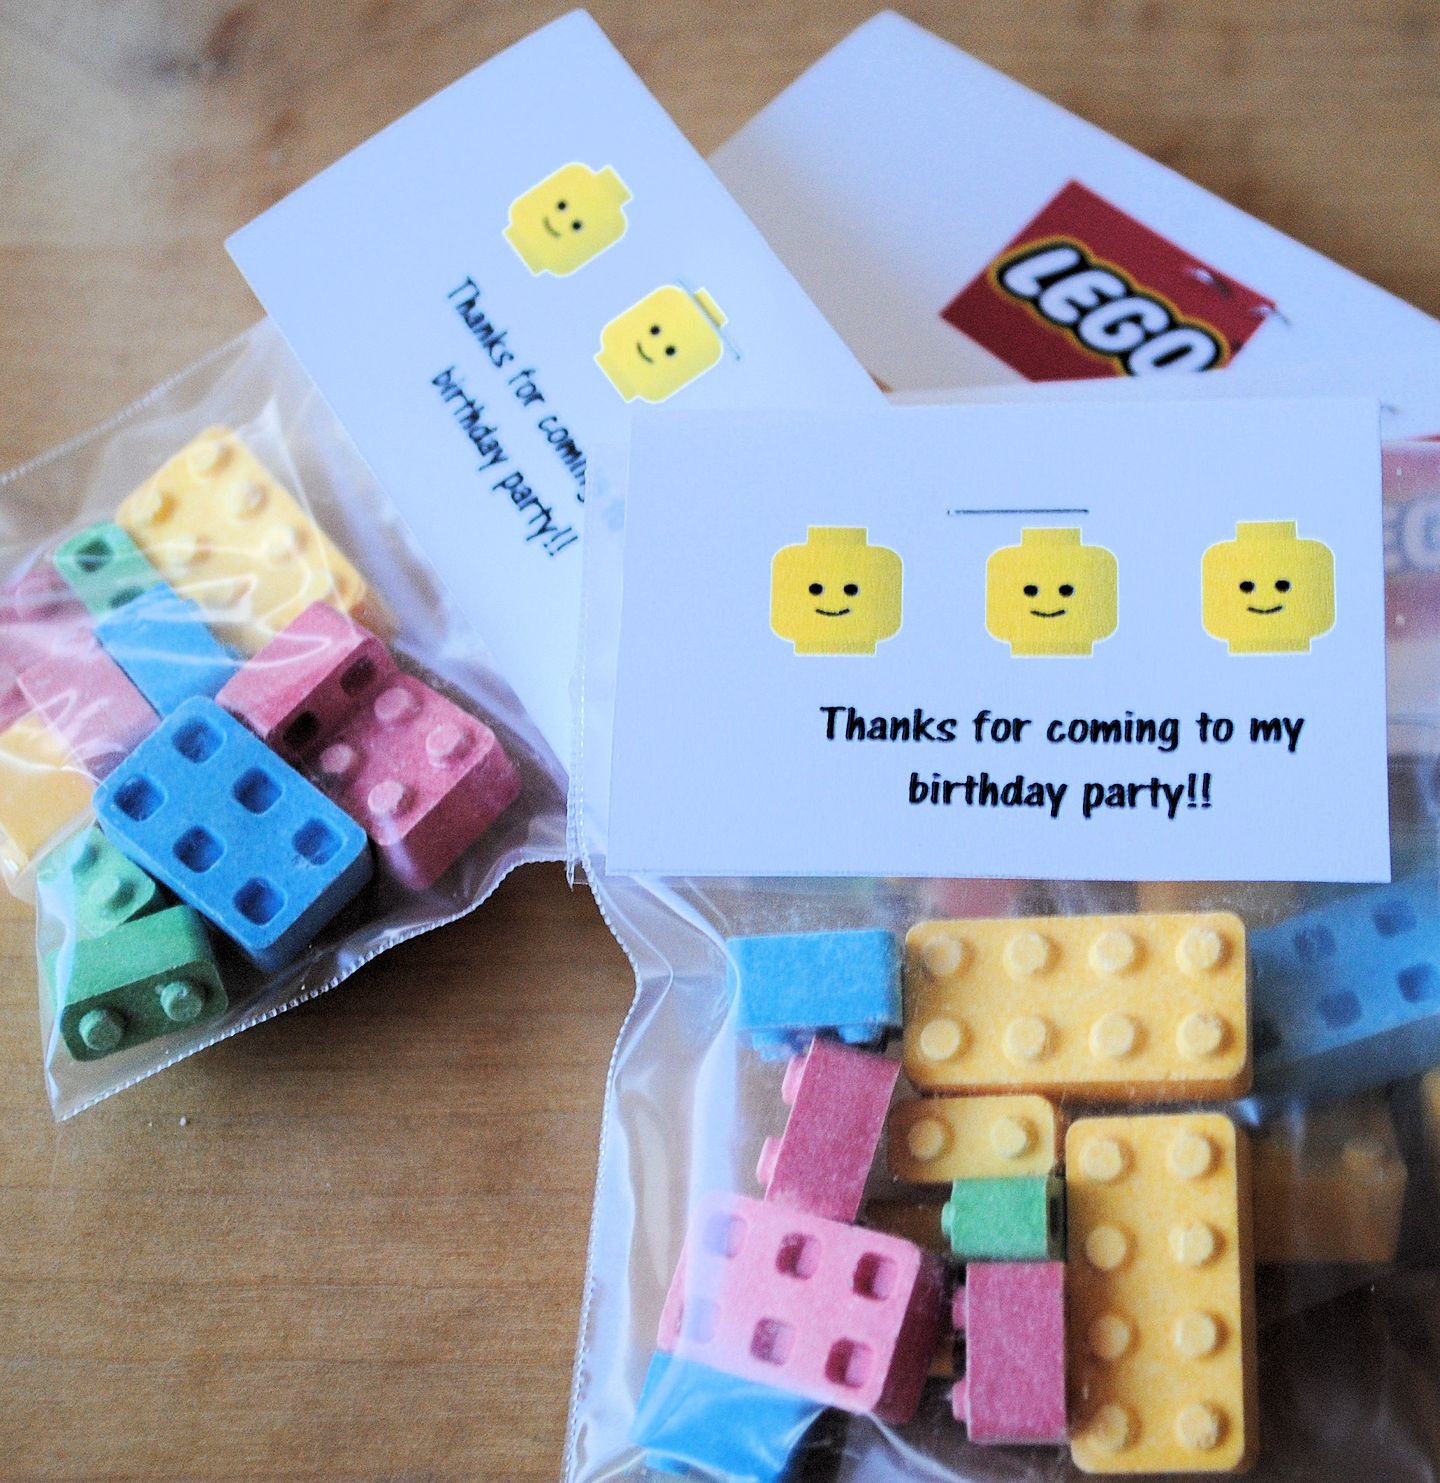 Lego Birthday Party Kit
 Lego Birthday Party Ideas Crazy Little Projects